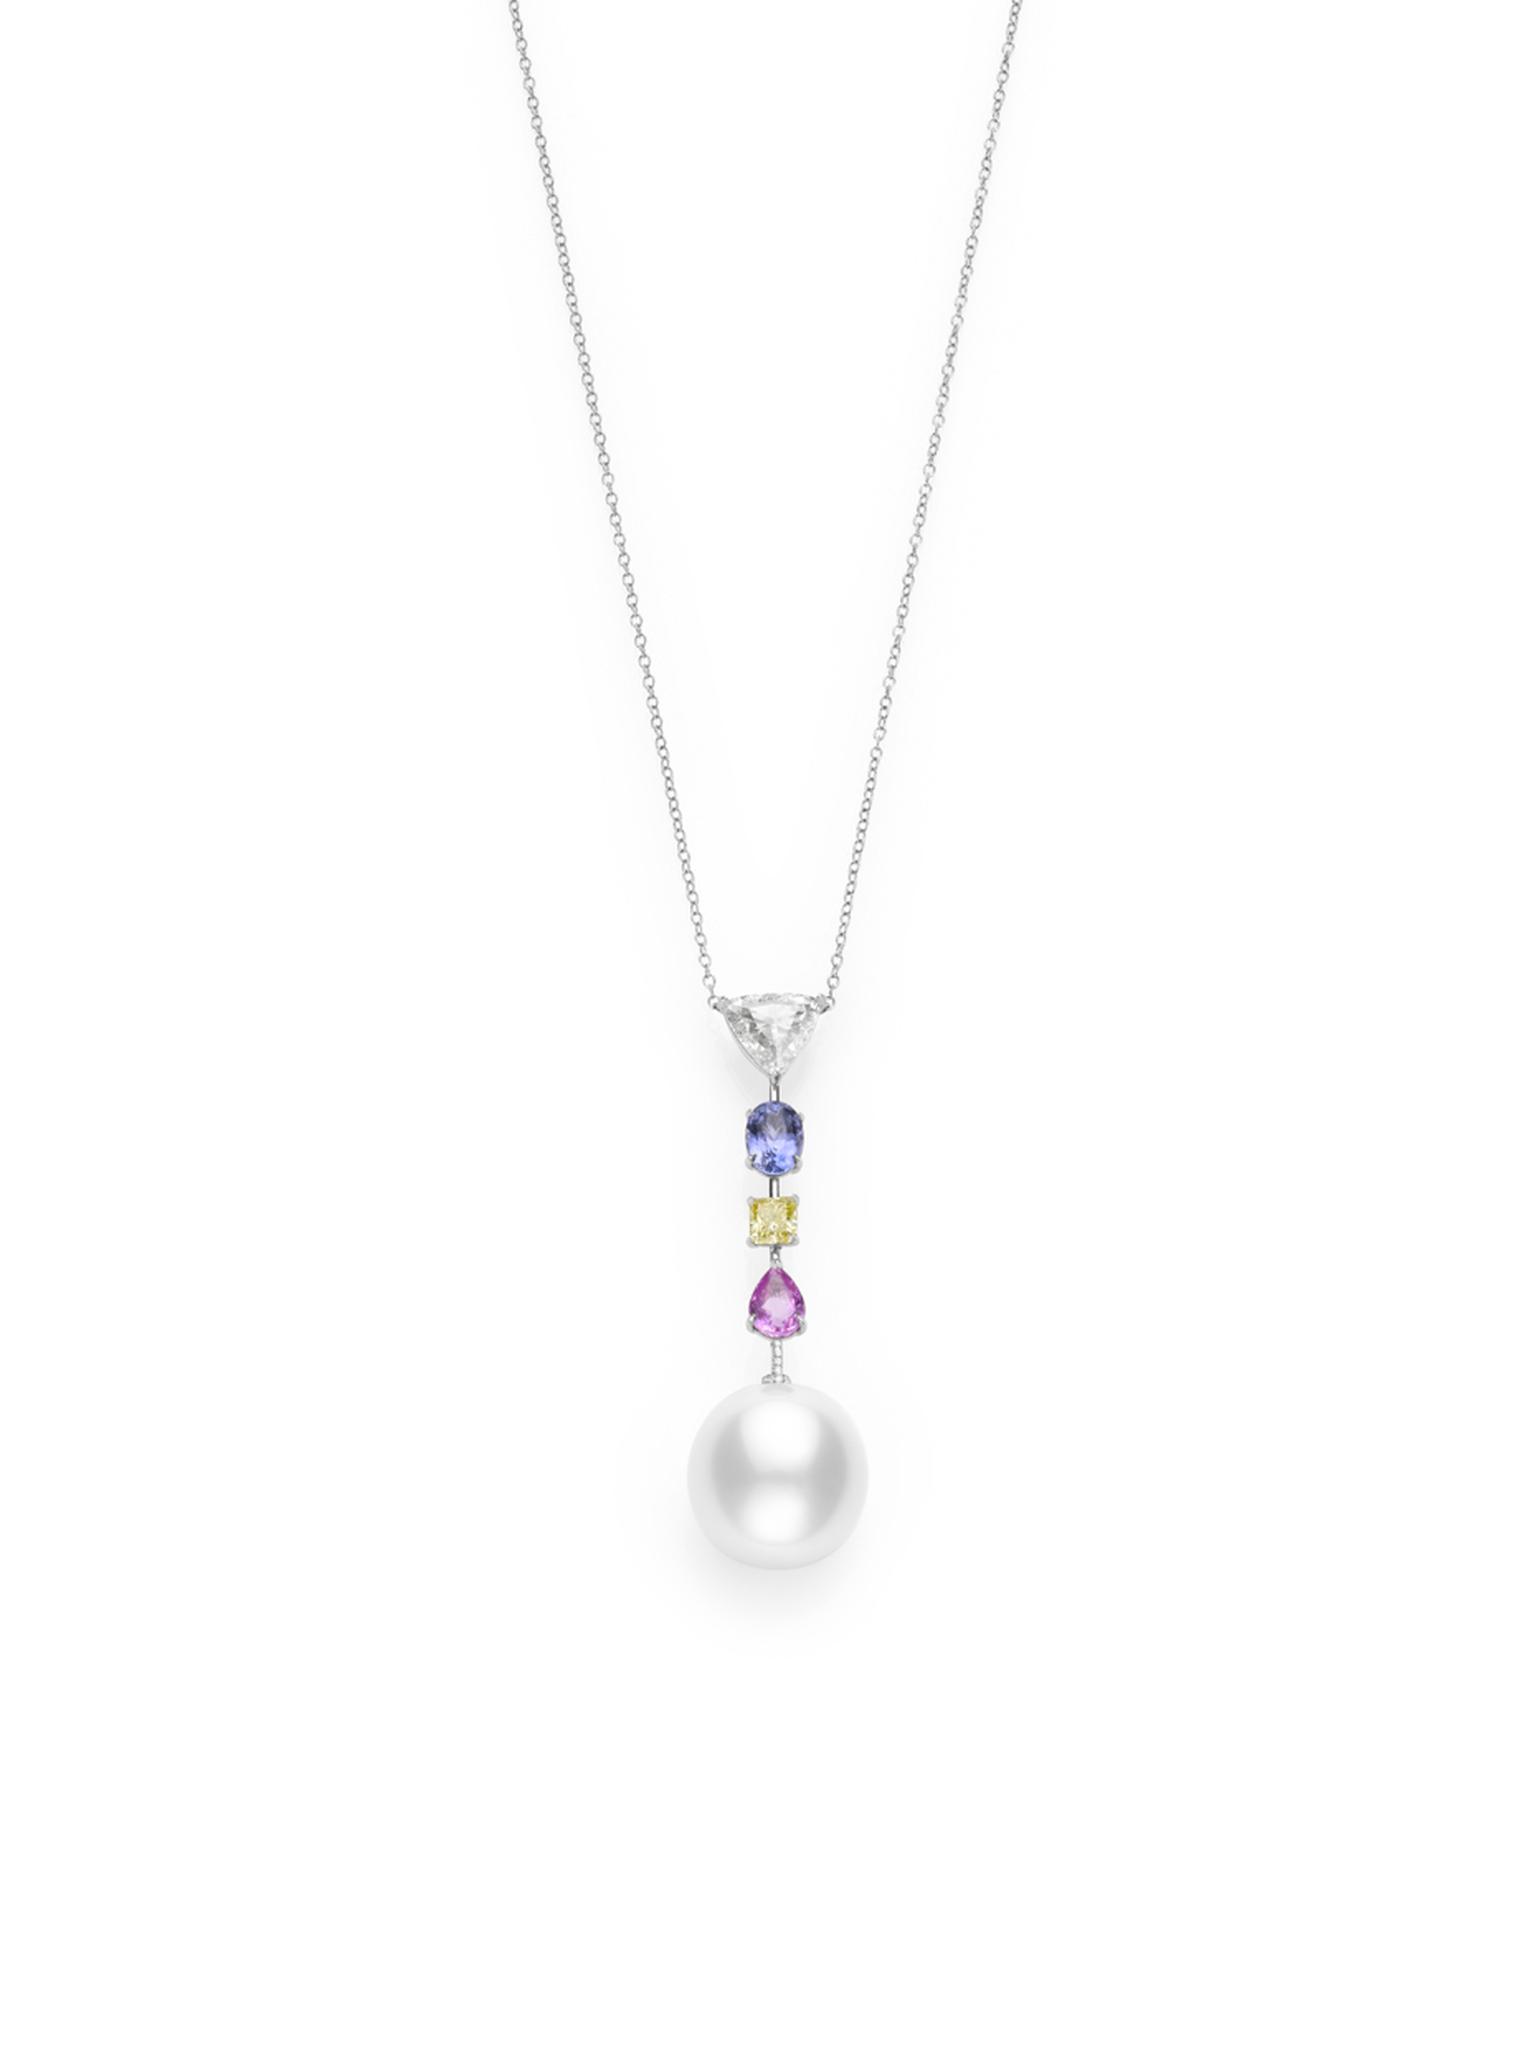 Mikimoto Color Prestige collection necklace featuring a sapphire, yellow diamond and pink spinel leading to a single South Sea cultured pearl